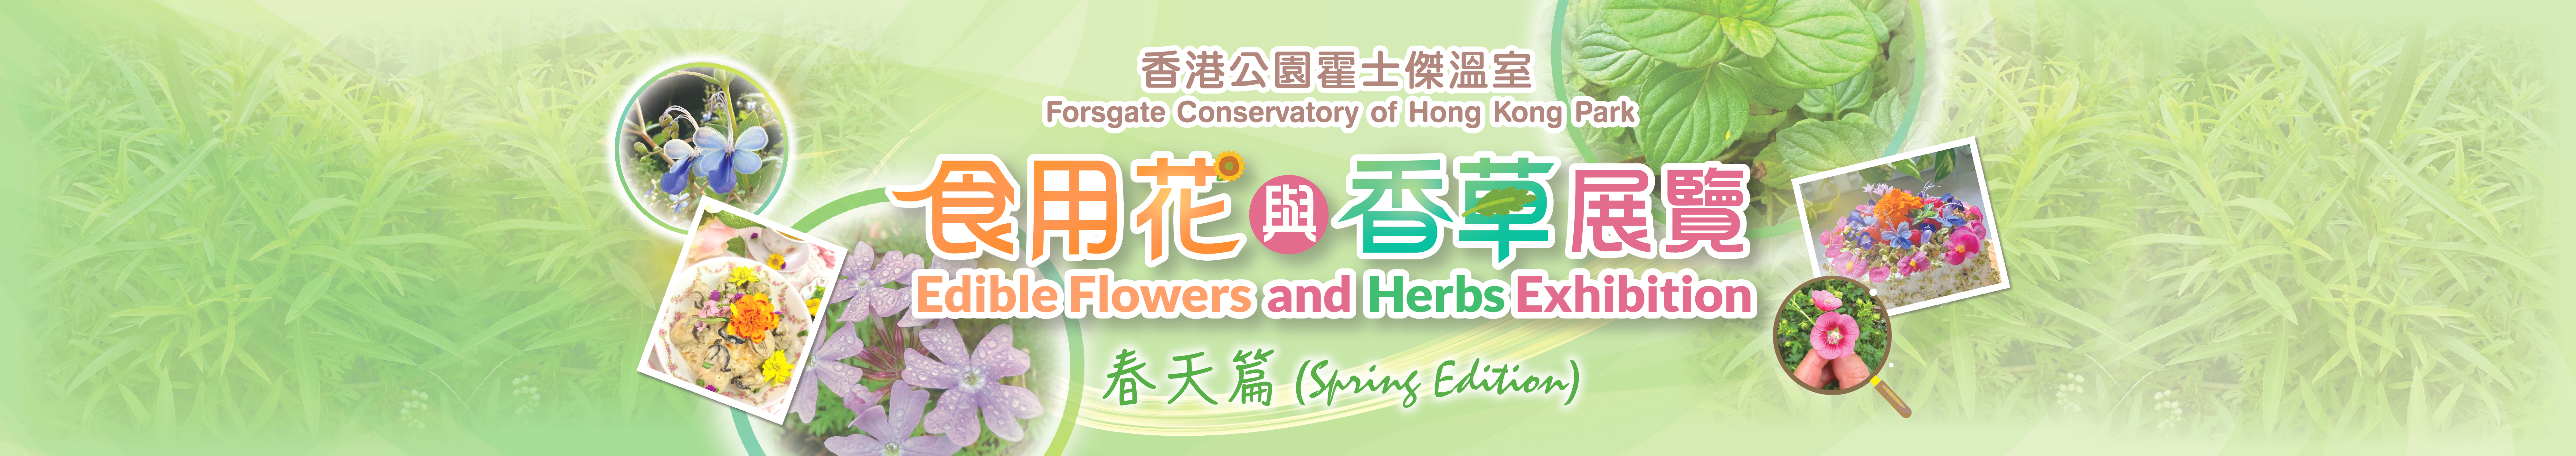 Edible Flowers and Herbs Exhibition at Hong Kong Park (Spring Edition)